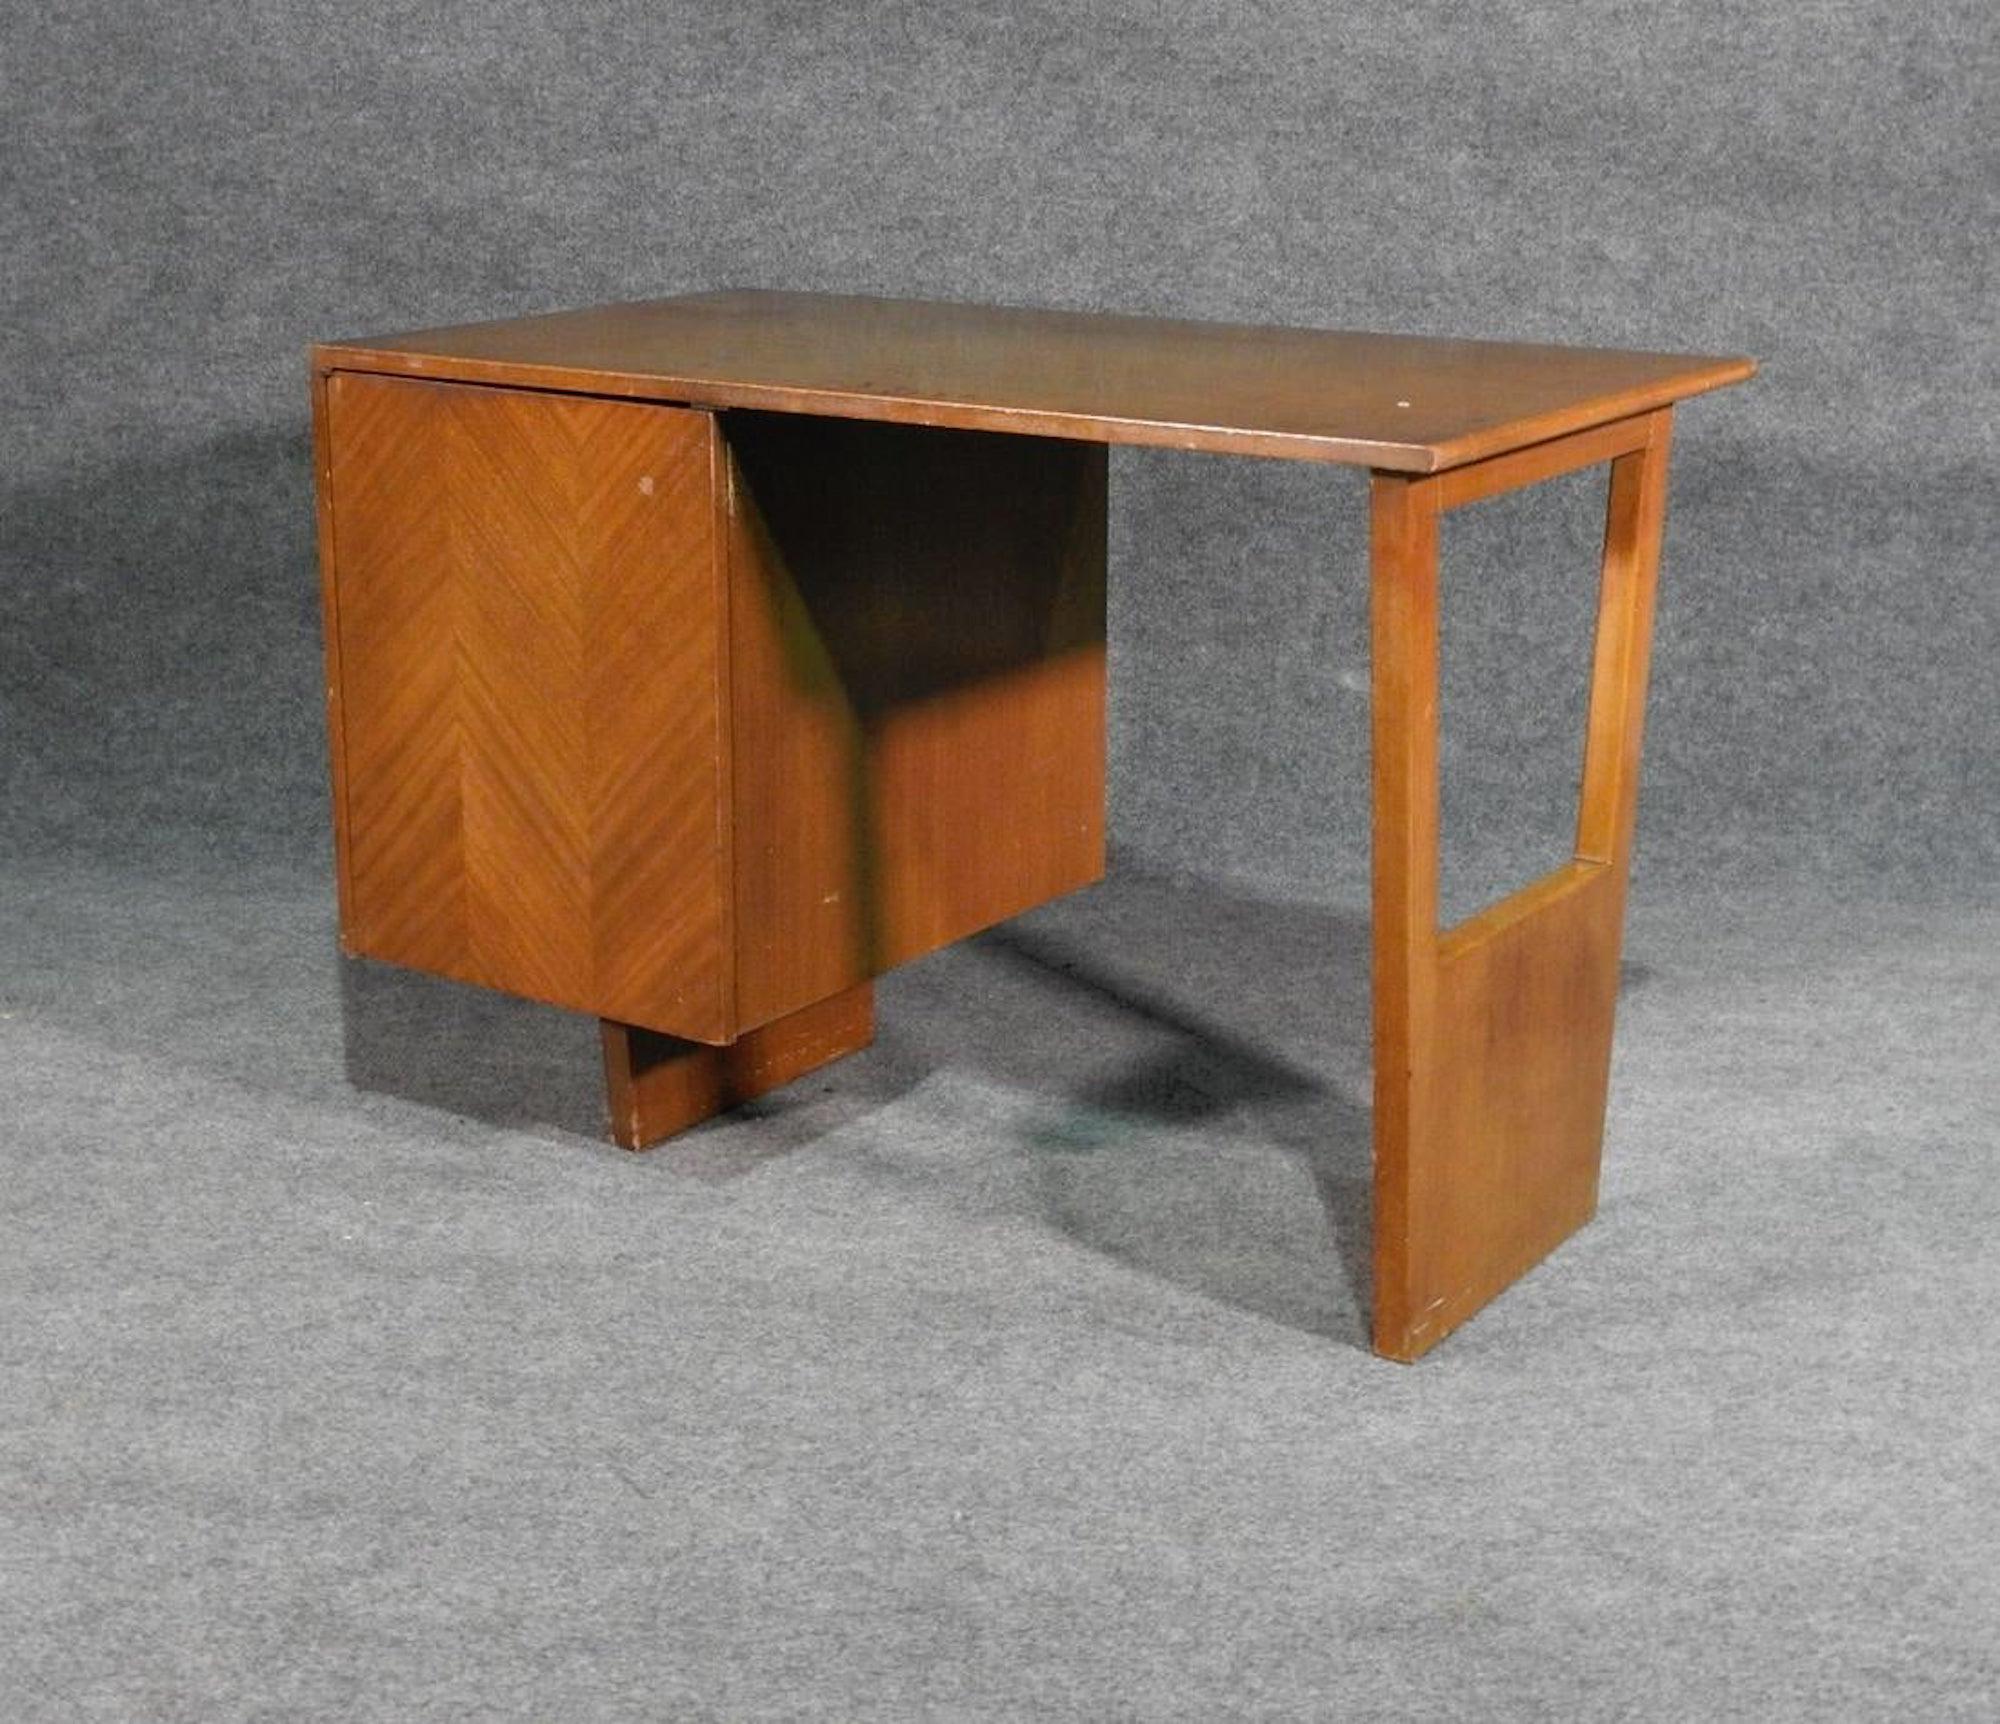 Mid-Century Modern writing desk by Harvey Probber with patterned front cabinet and concealed drawers.
(Please confirm item location - NY or NJ - with dealer).
   